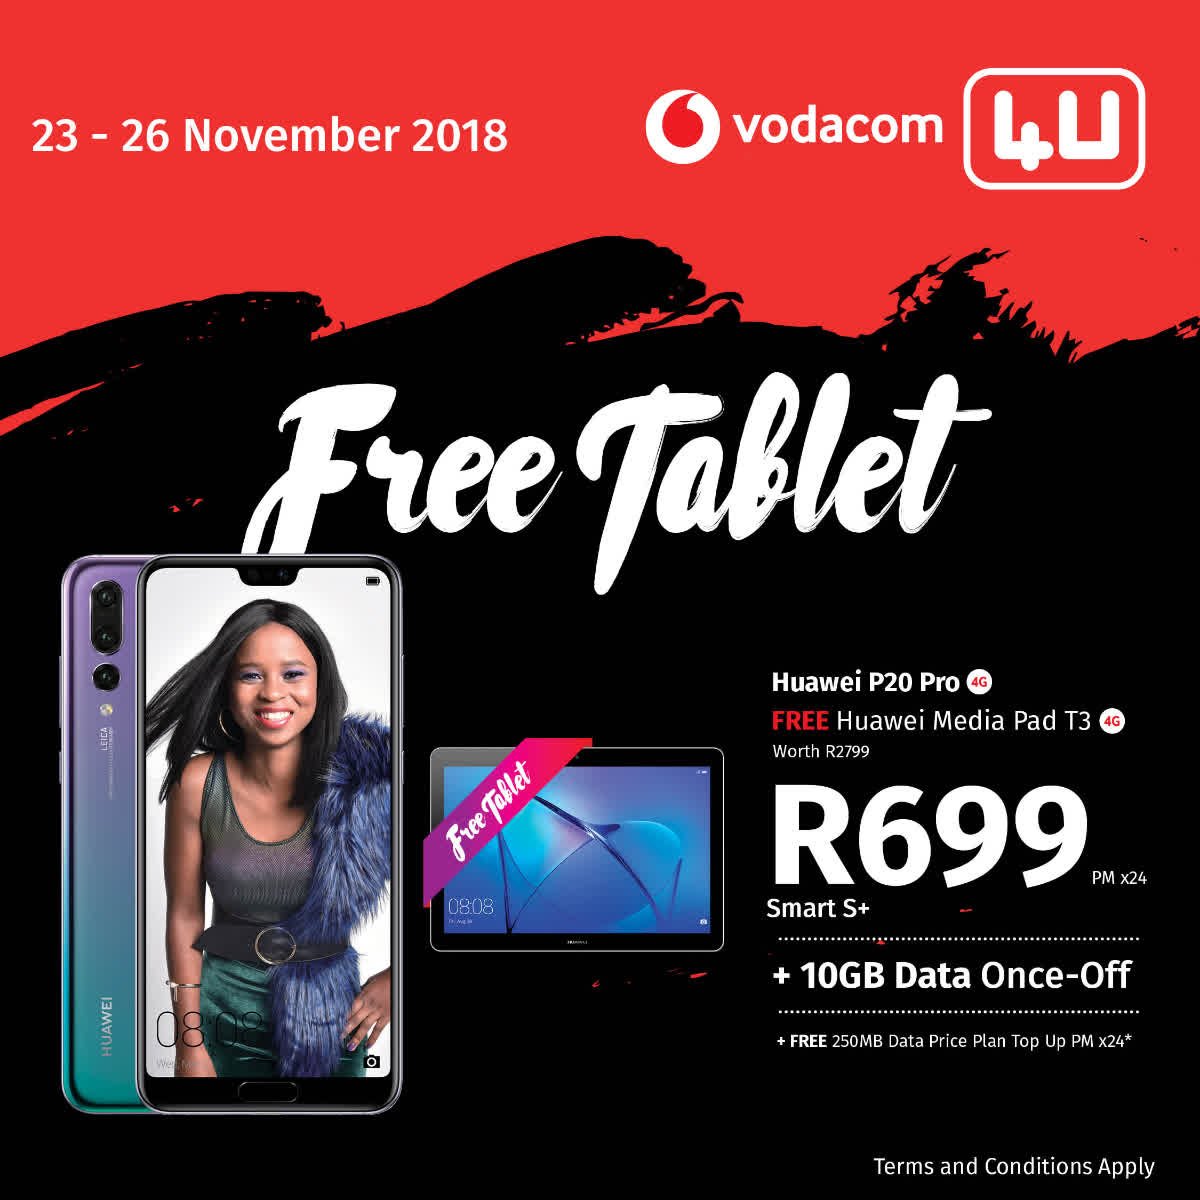 Vodacom 4u On Twitter We Re Going To Be Your Bff This Blackfriday At Vodacom 4u S Bff Get The Huawei P20 Pro And Get The Huawei Media Pad T3 Free For Only R699pm